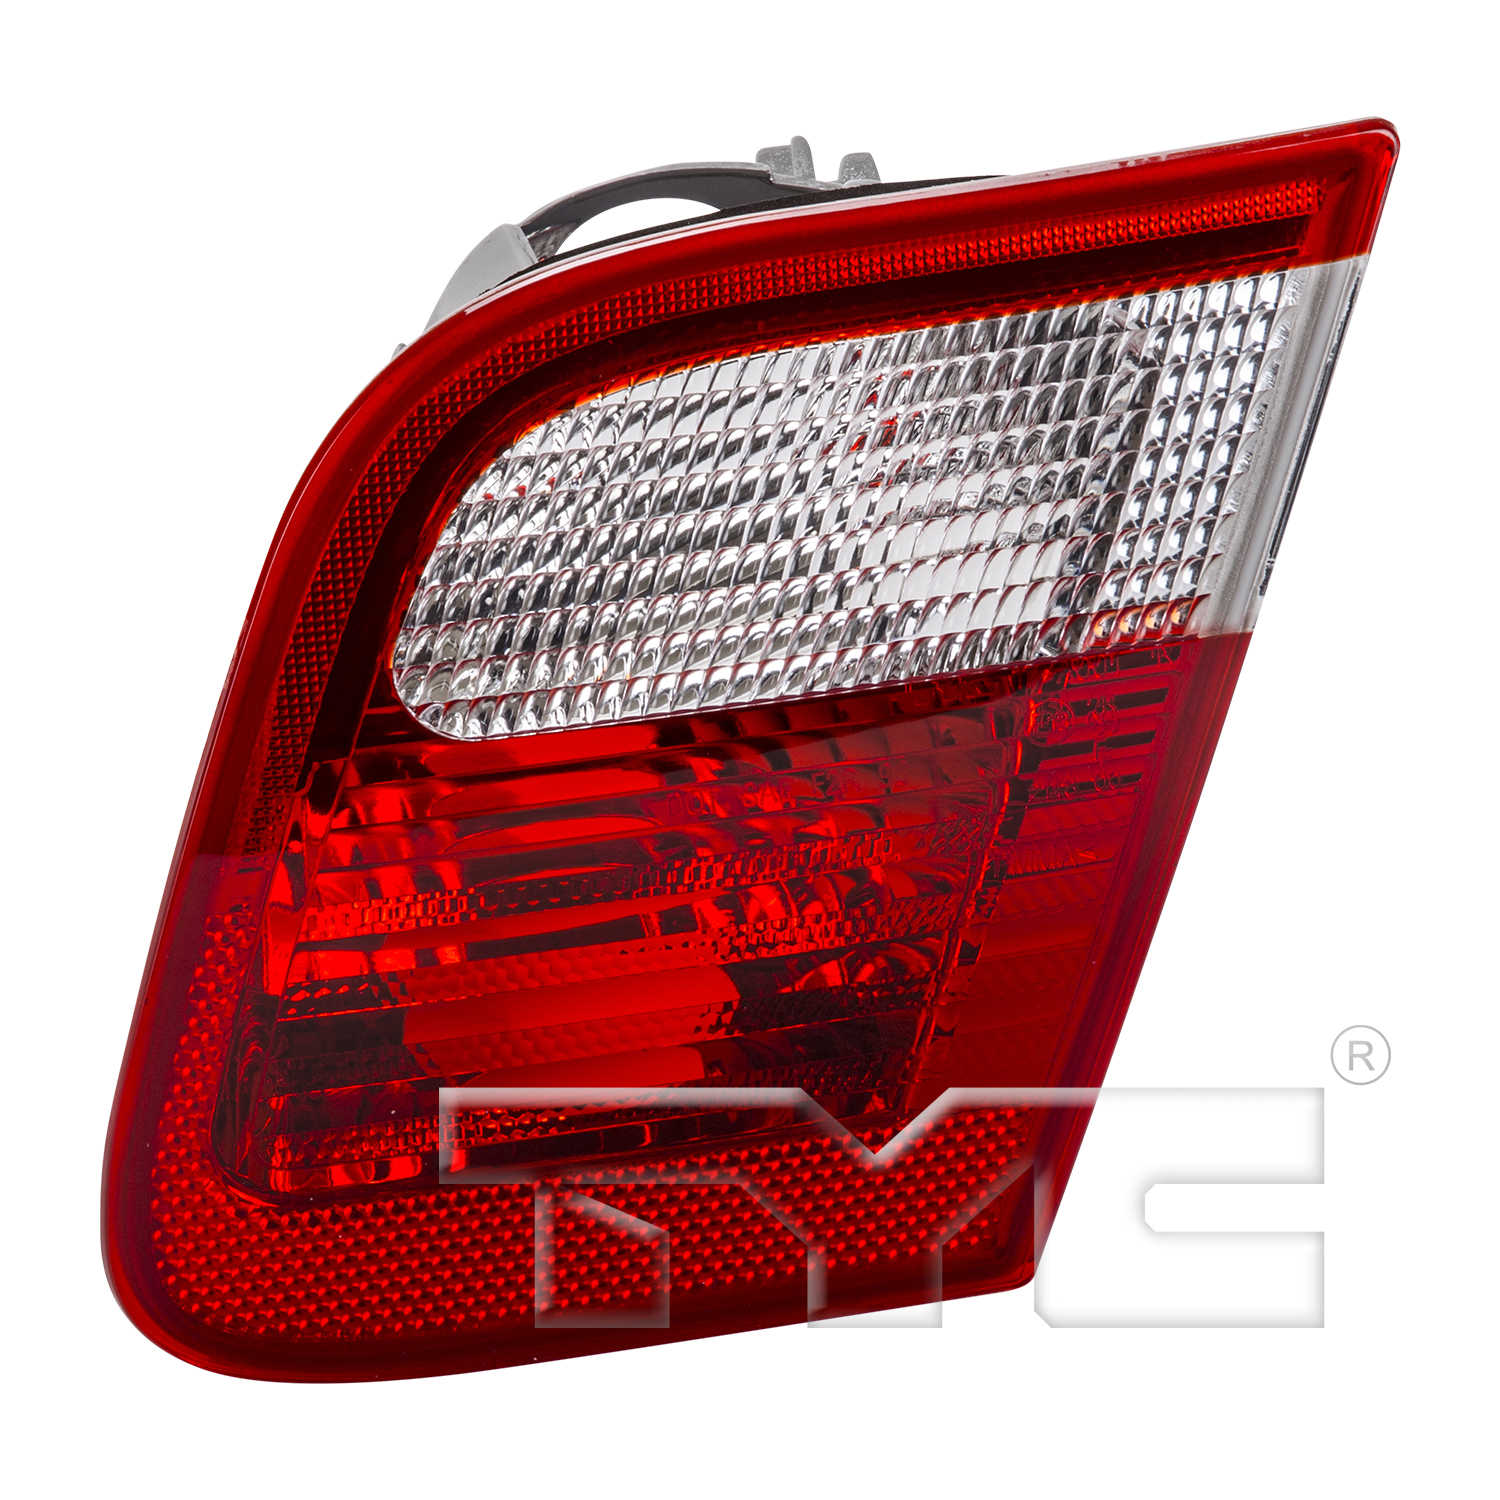 Aftermarket TAILLIGHTS for BMW - 330I, 330i,01-01,RT Back up lamp assy